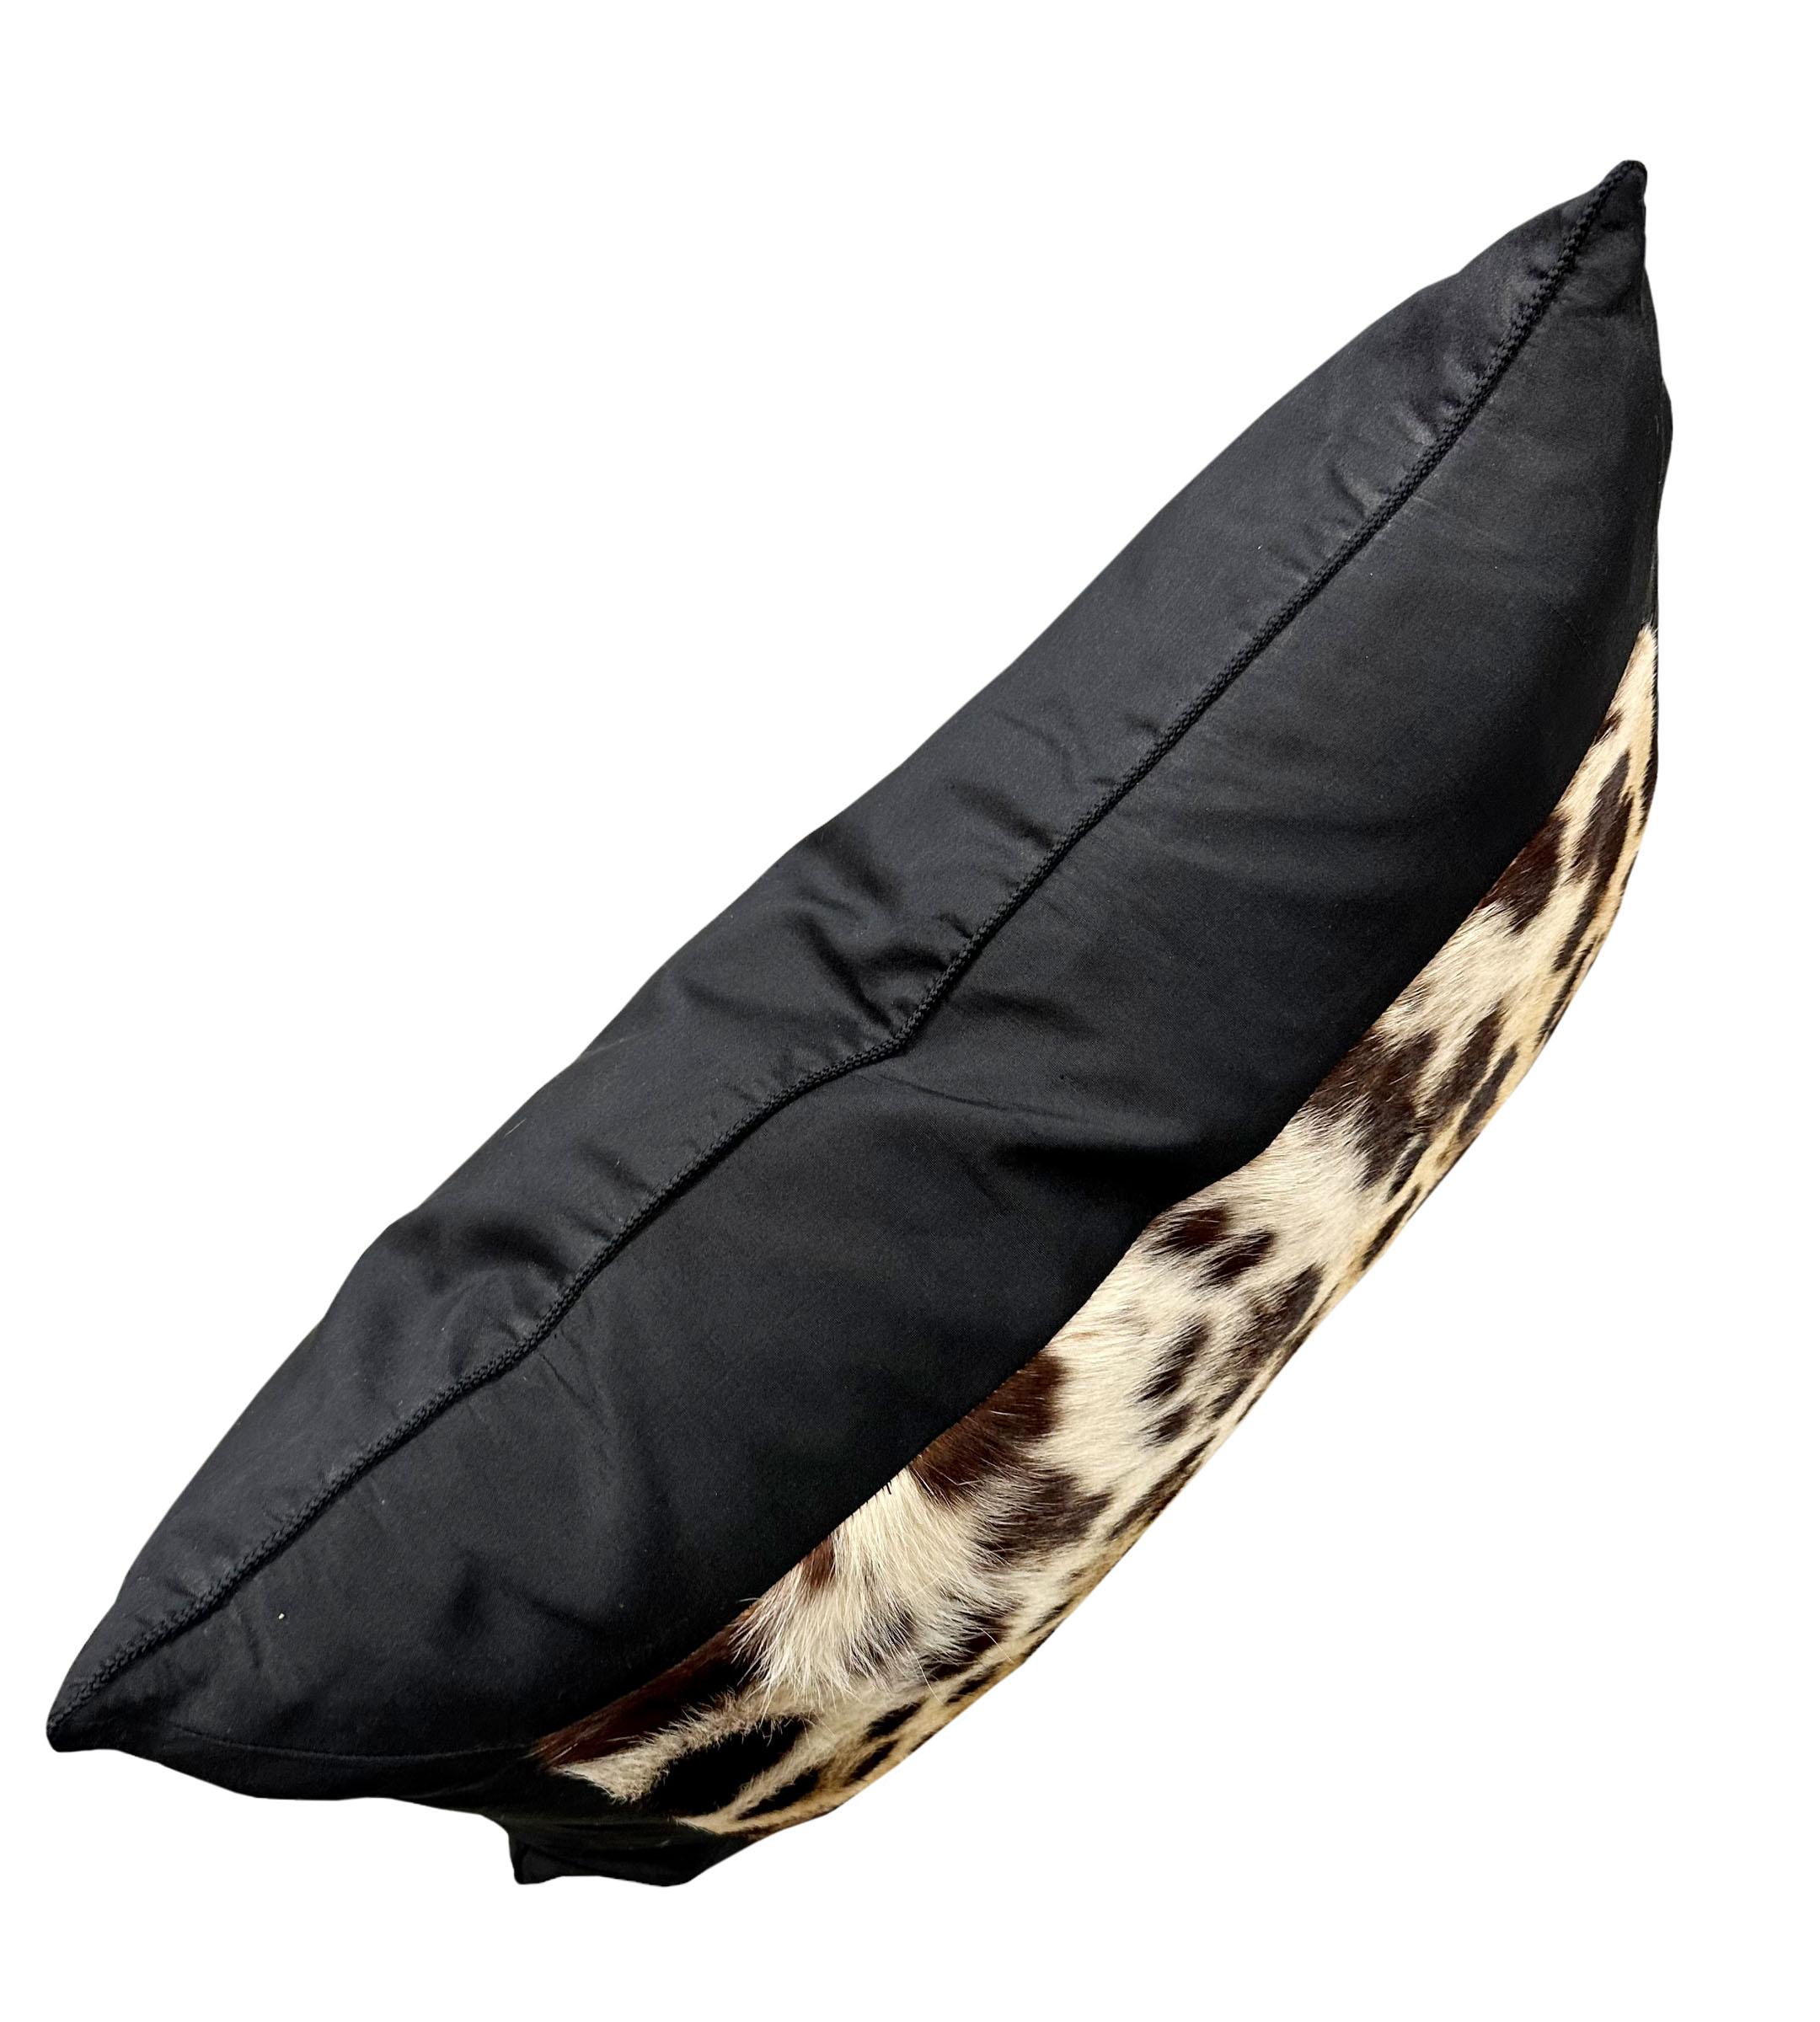 A single handmade, black silk taffeta with genuine leopard skin lumbar pillow. The silk has a micro bladed trim and pillows are filled with goose down and feathers. Pillows are mitered as well to the corners of the leopard. The leopard is 6